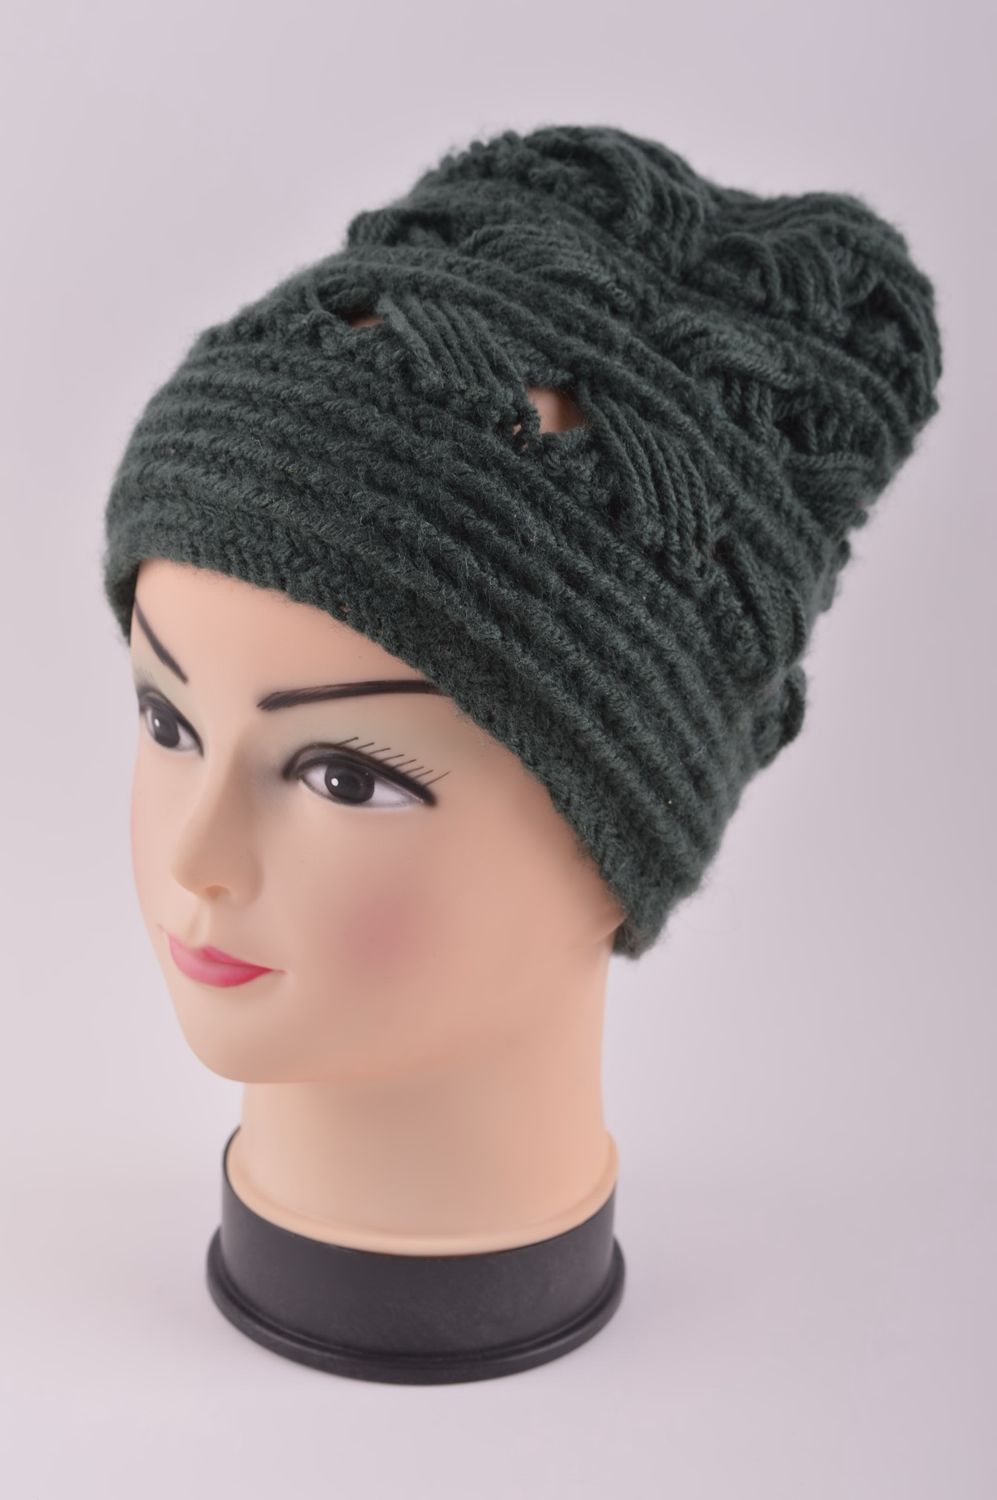 Handmade knitted hat fashion hat for women winter accessories for girls photo 2